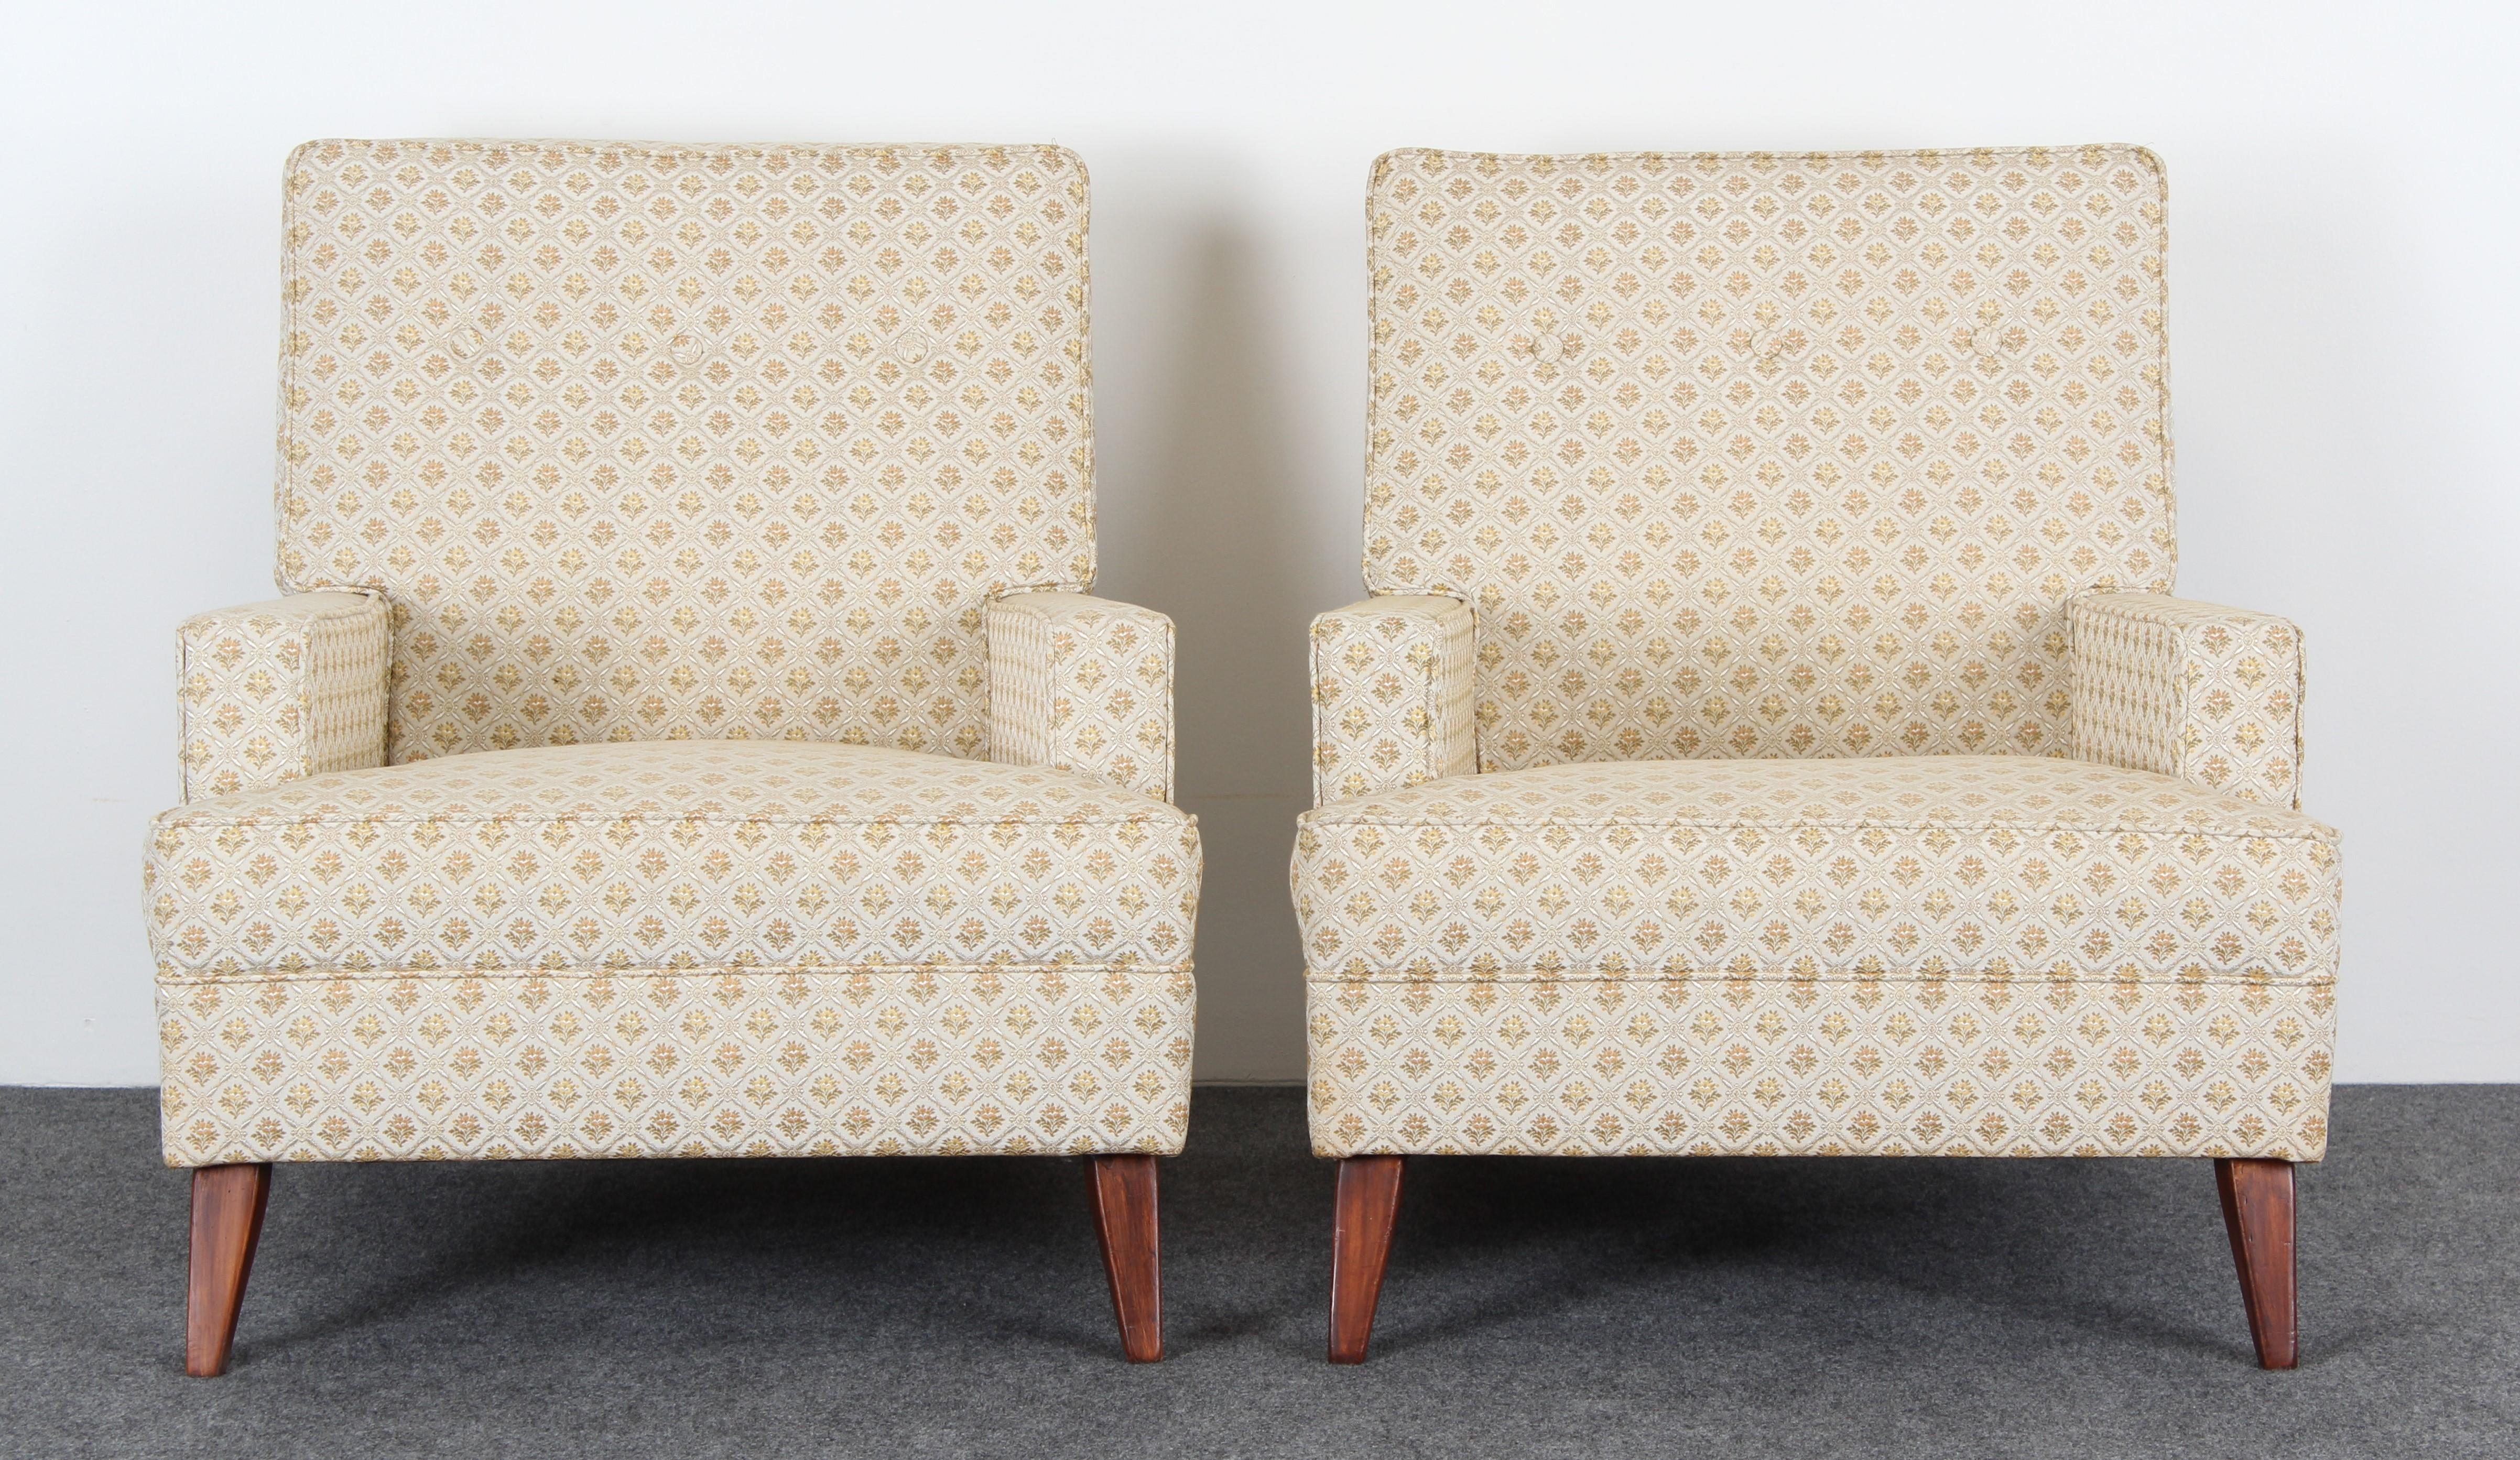 A classic pair of Robsjohn Gibbings style Upholstered lounge chairs. Vintage fabric, new upholstery recommended. Sturdy and structurally sound frames.

Dimensions: 32.75